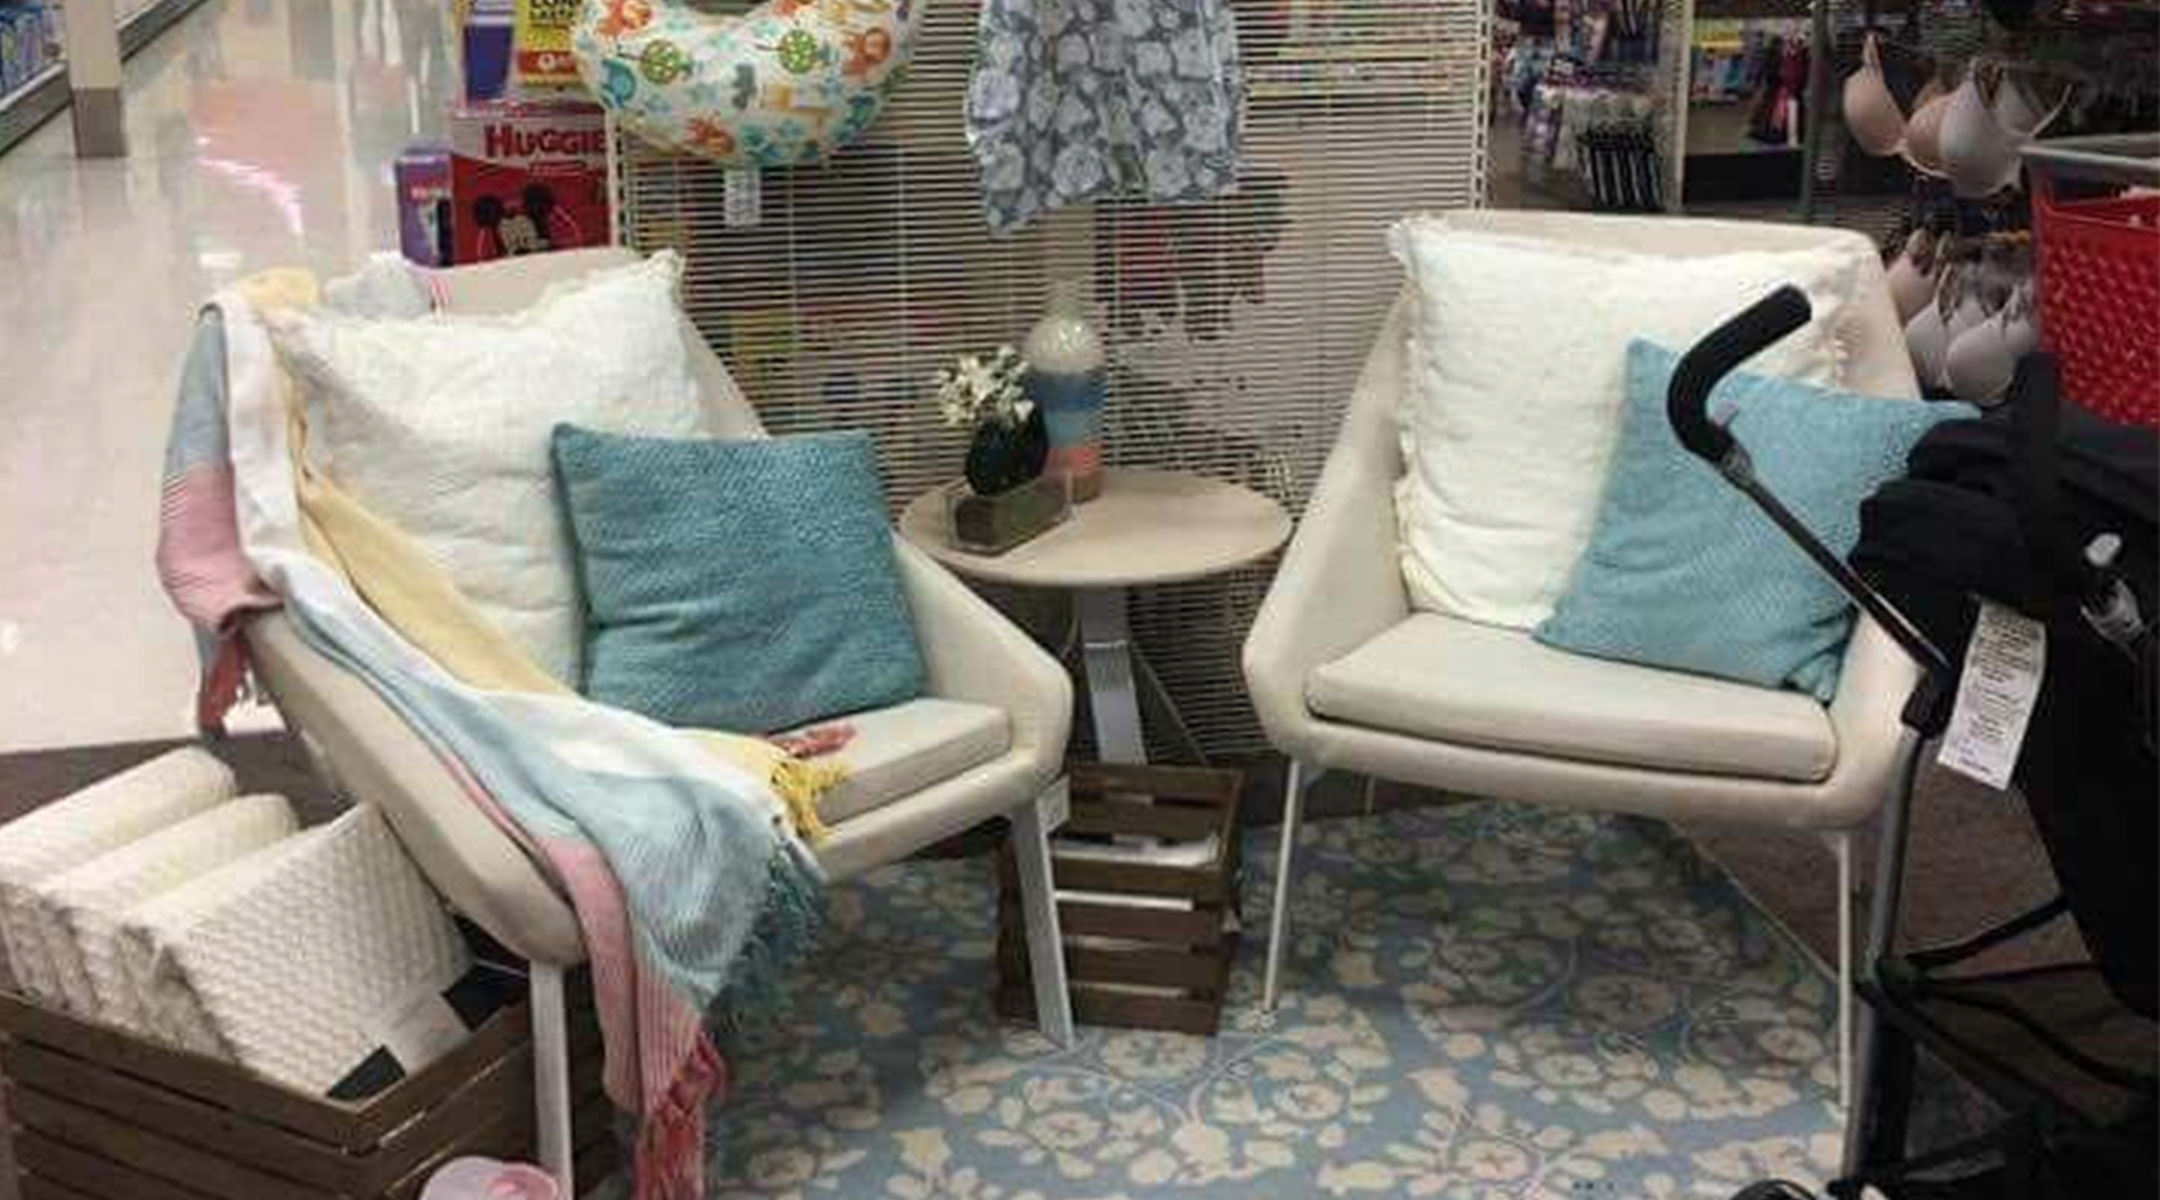 target nursing station for moms while they shop